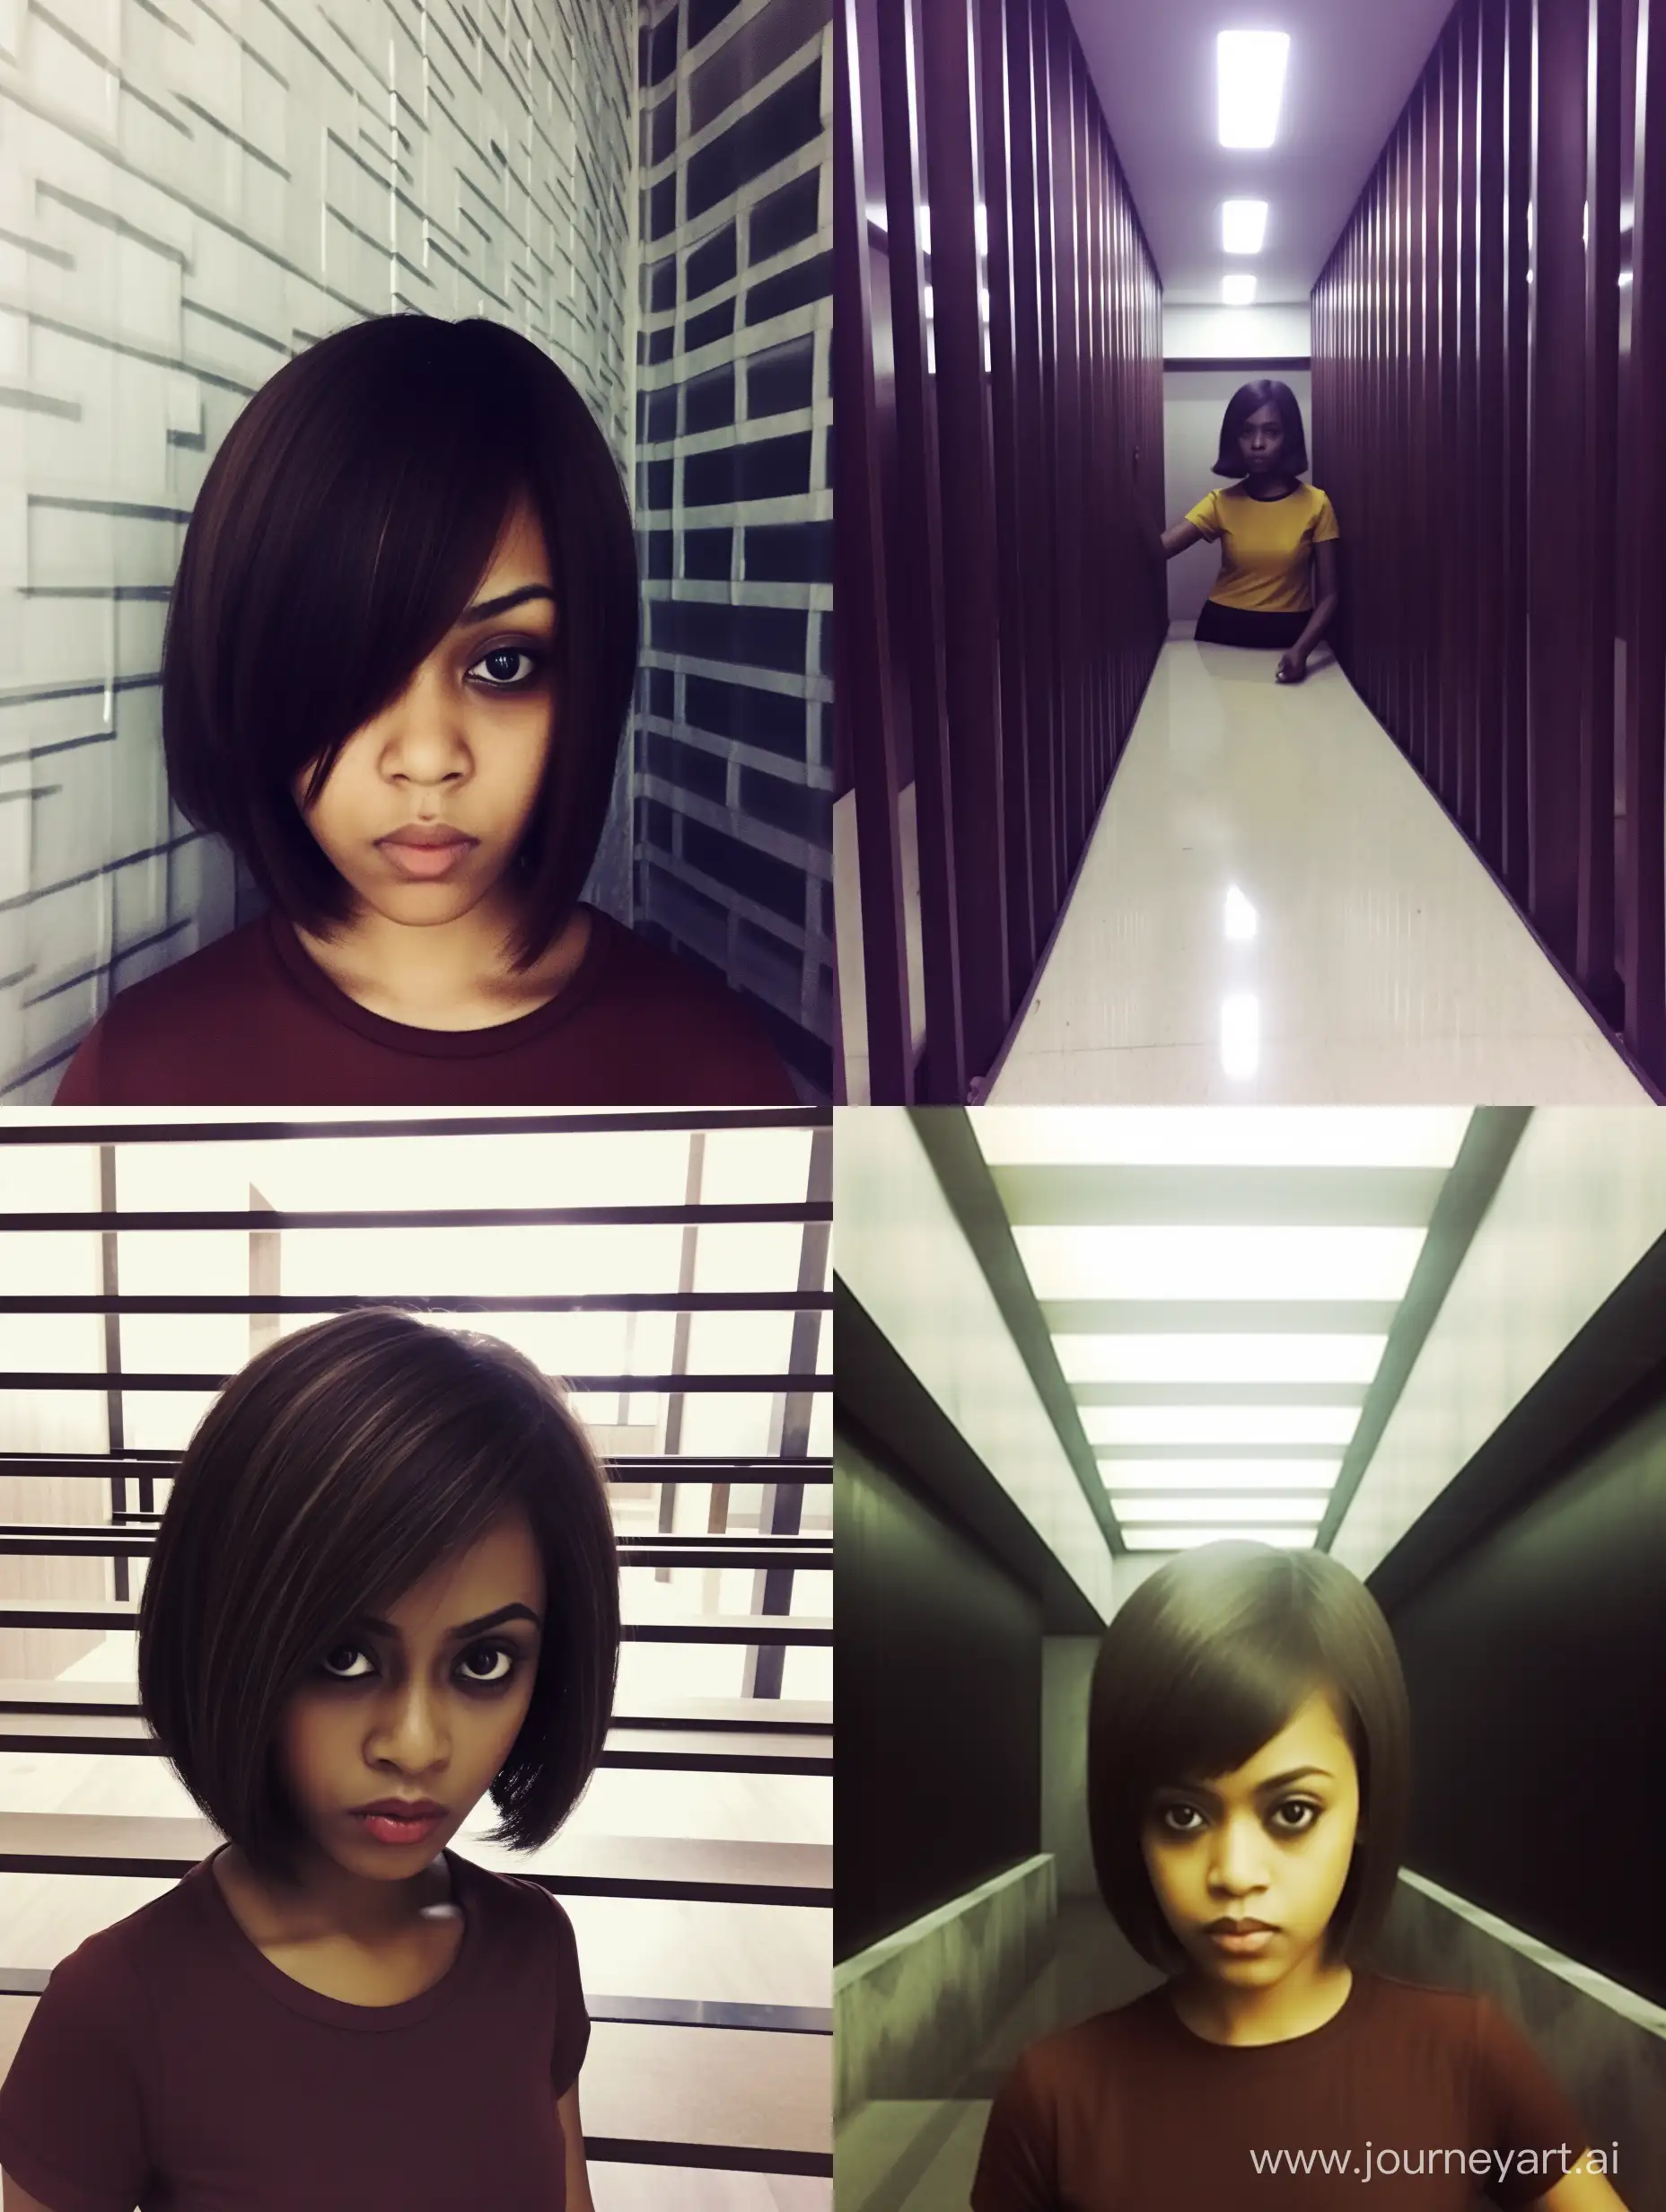 Interior selfie of a woman with brown coloured bob hairstyle, yellowish eyes, indonesian, shot on a low camera quality phone